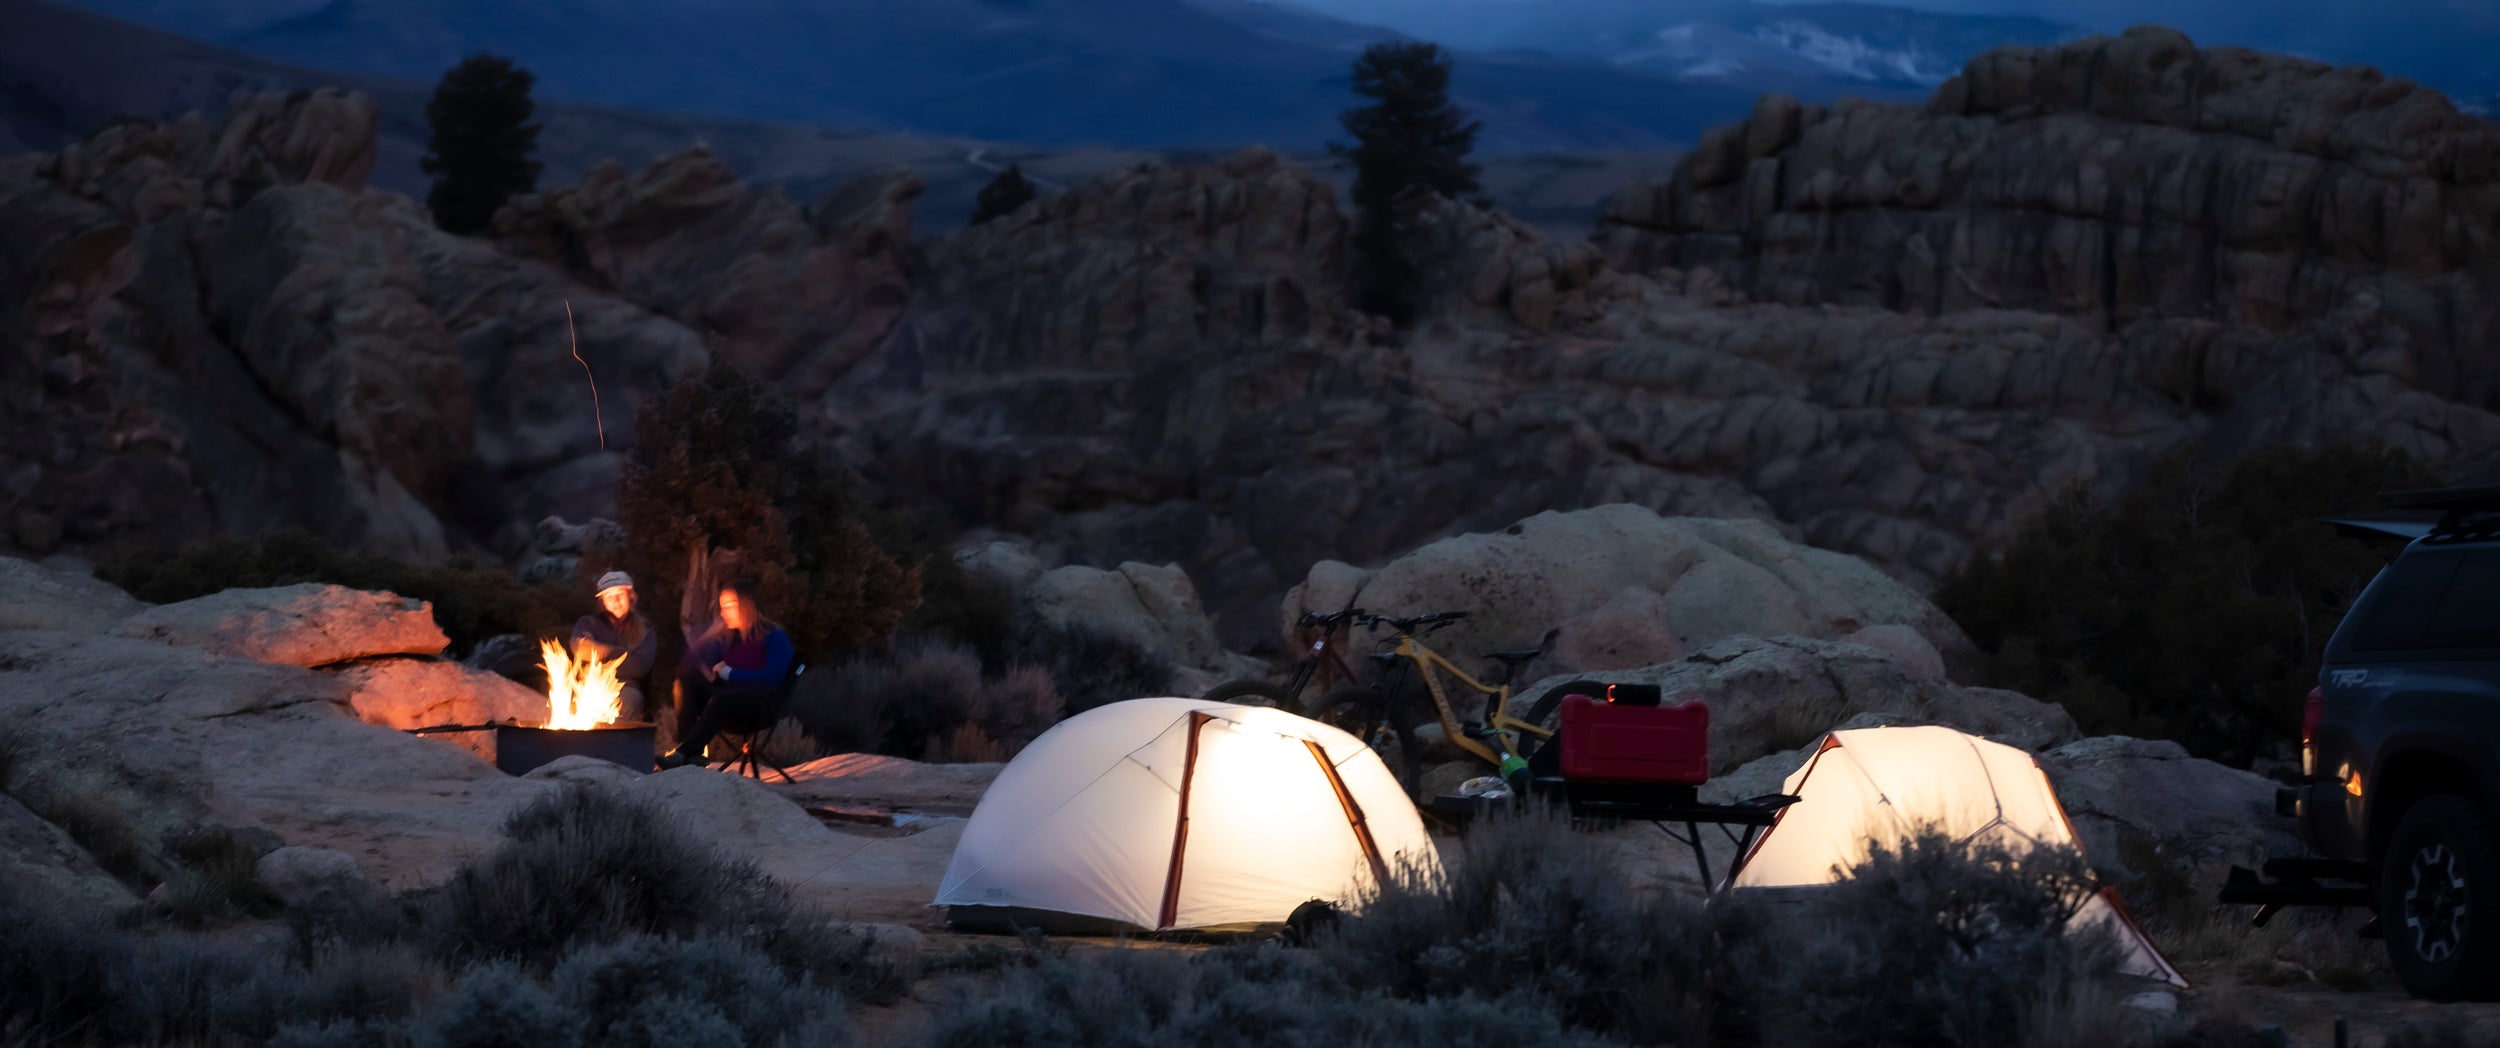 Booking Your Campsite: A Step-by-Step Guide for Backpackers